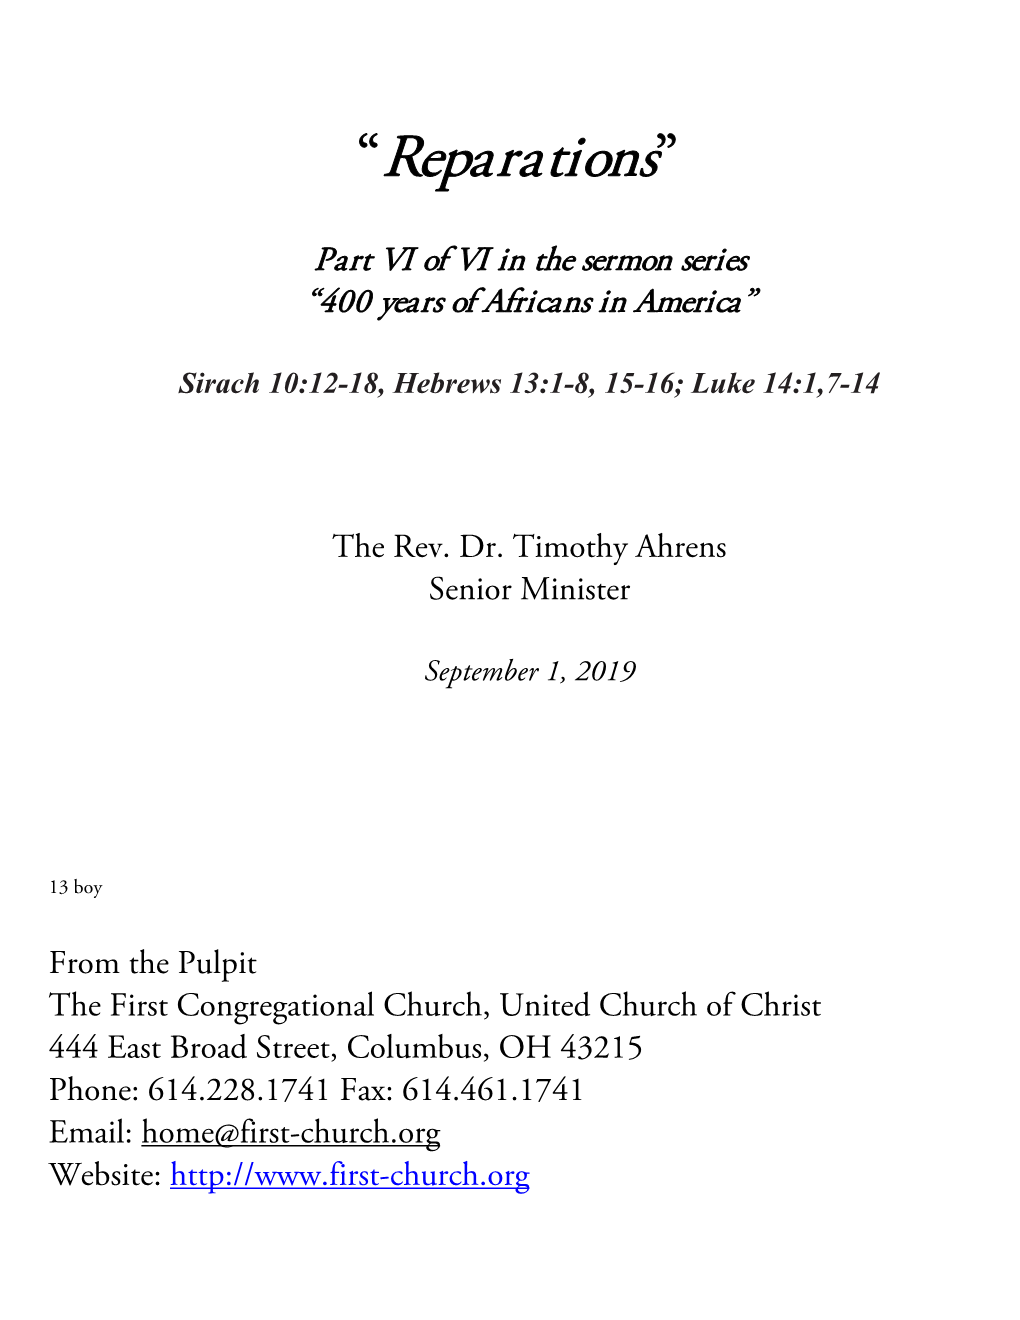 "Reparations" by the Rev. Dr. Tim Ahrens